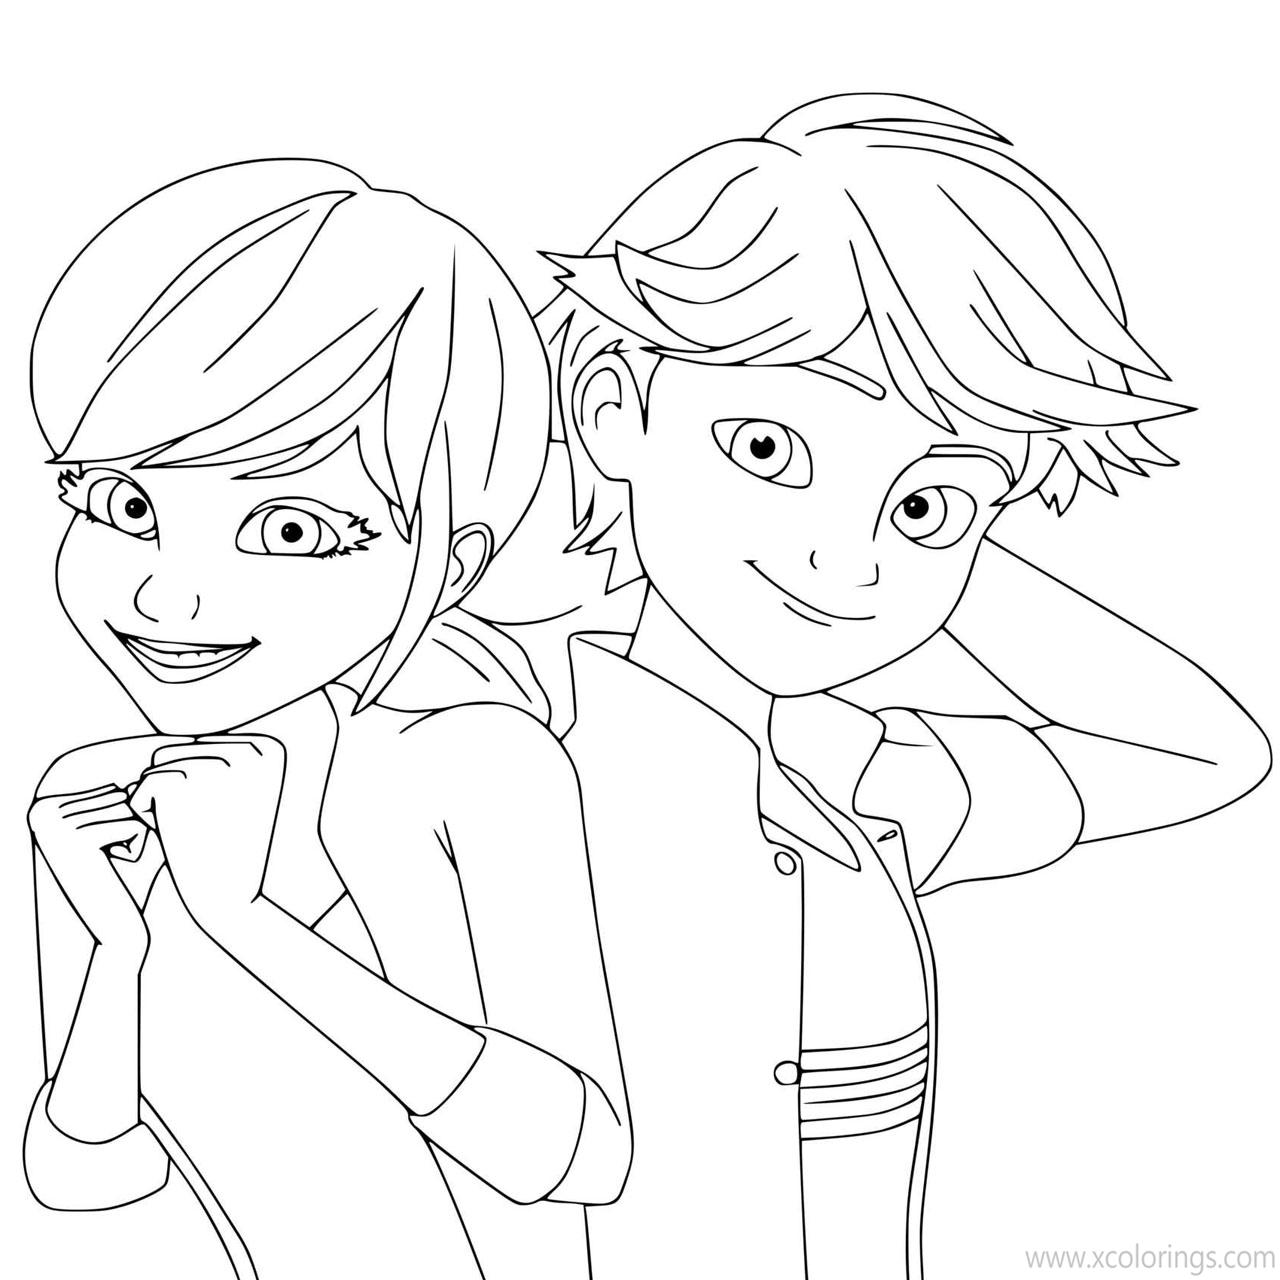 Free Marinandte Dupain Cheng And Adrien Agreste Miraculous Ladybug Coloring Pages printable